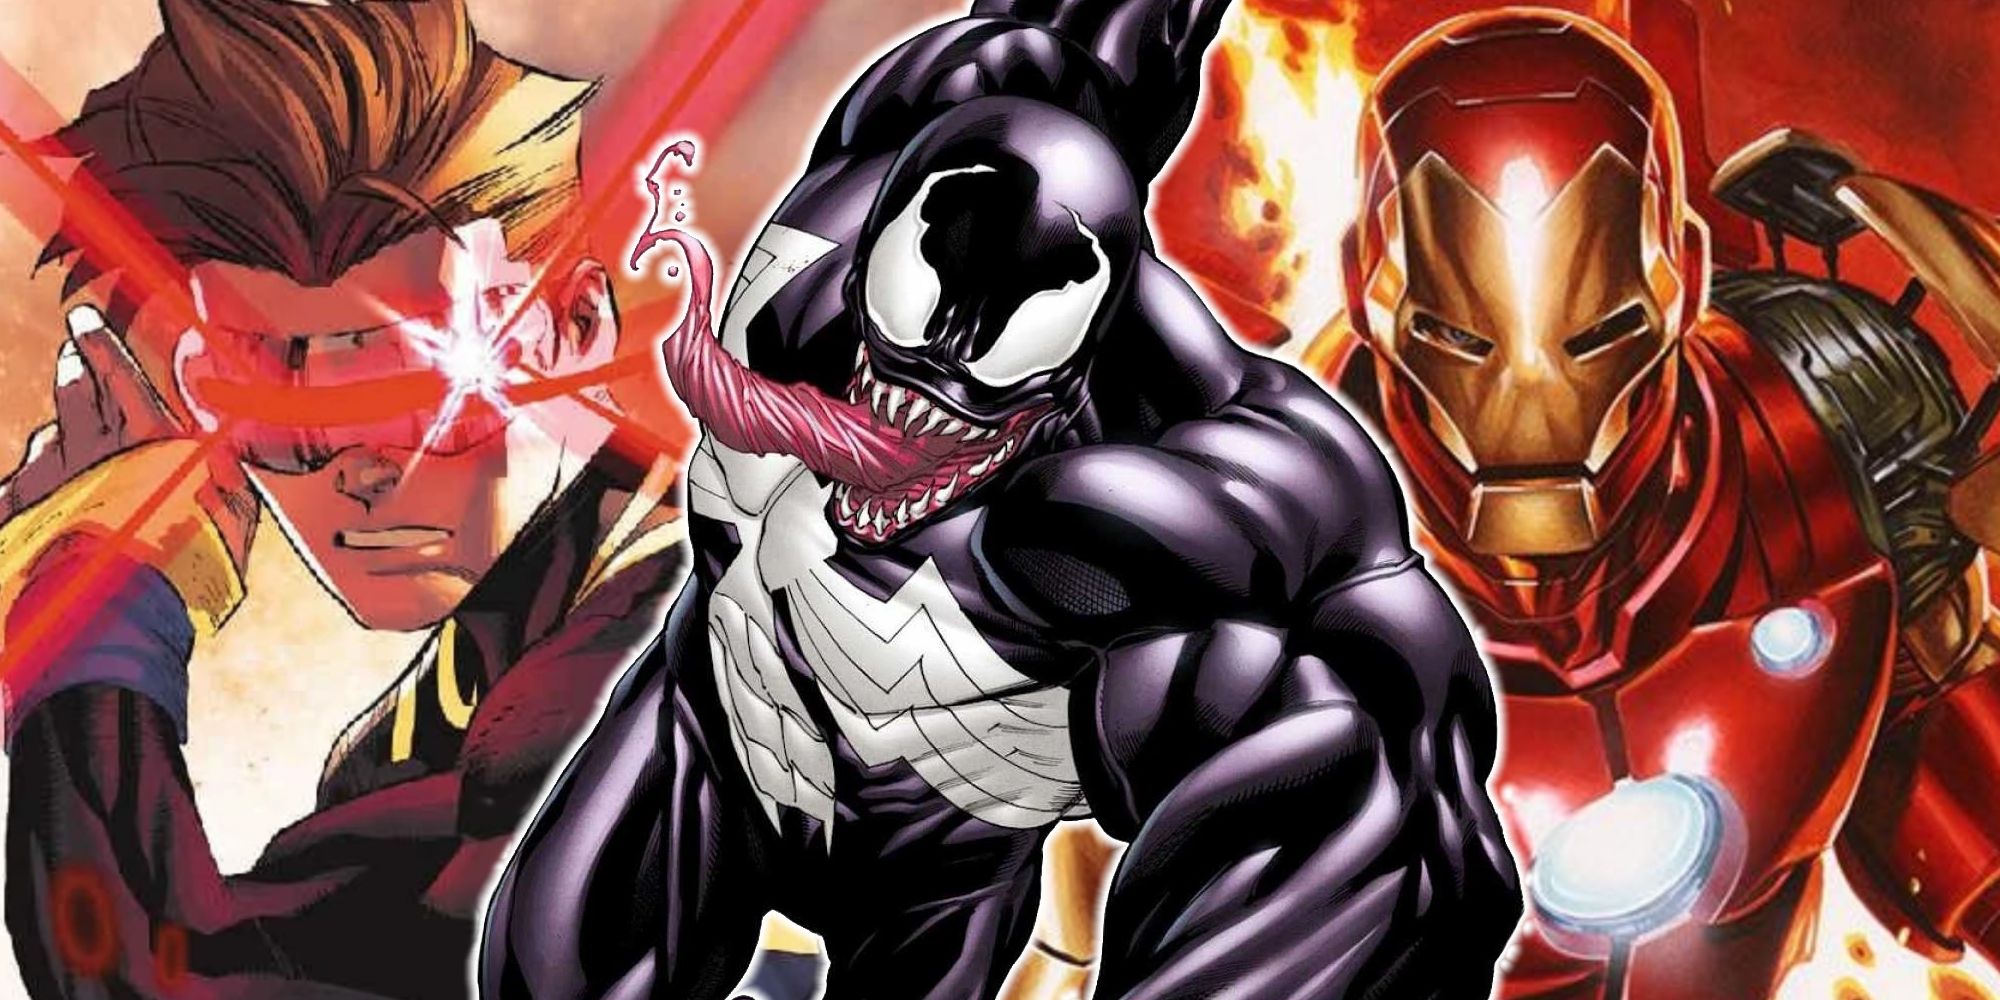 Split image of Cyclops, Venom, and Iron Man for street-level characters in Marvel Comics